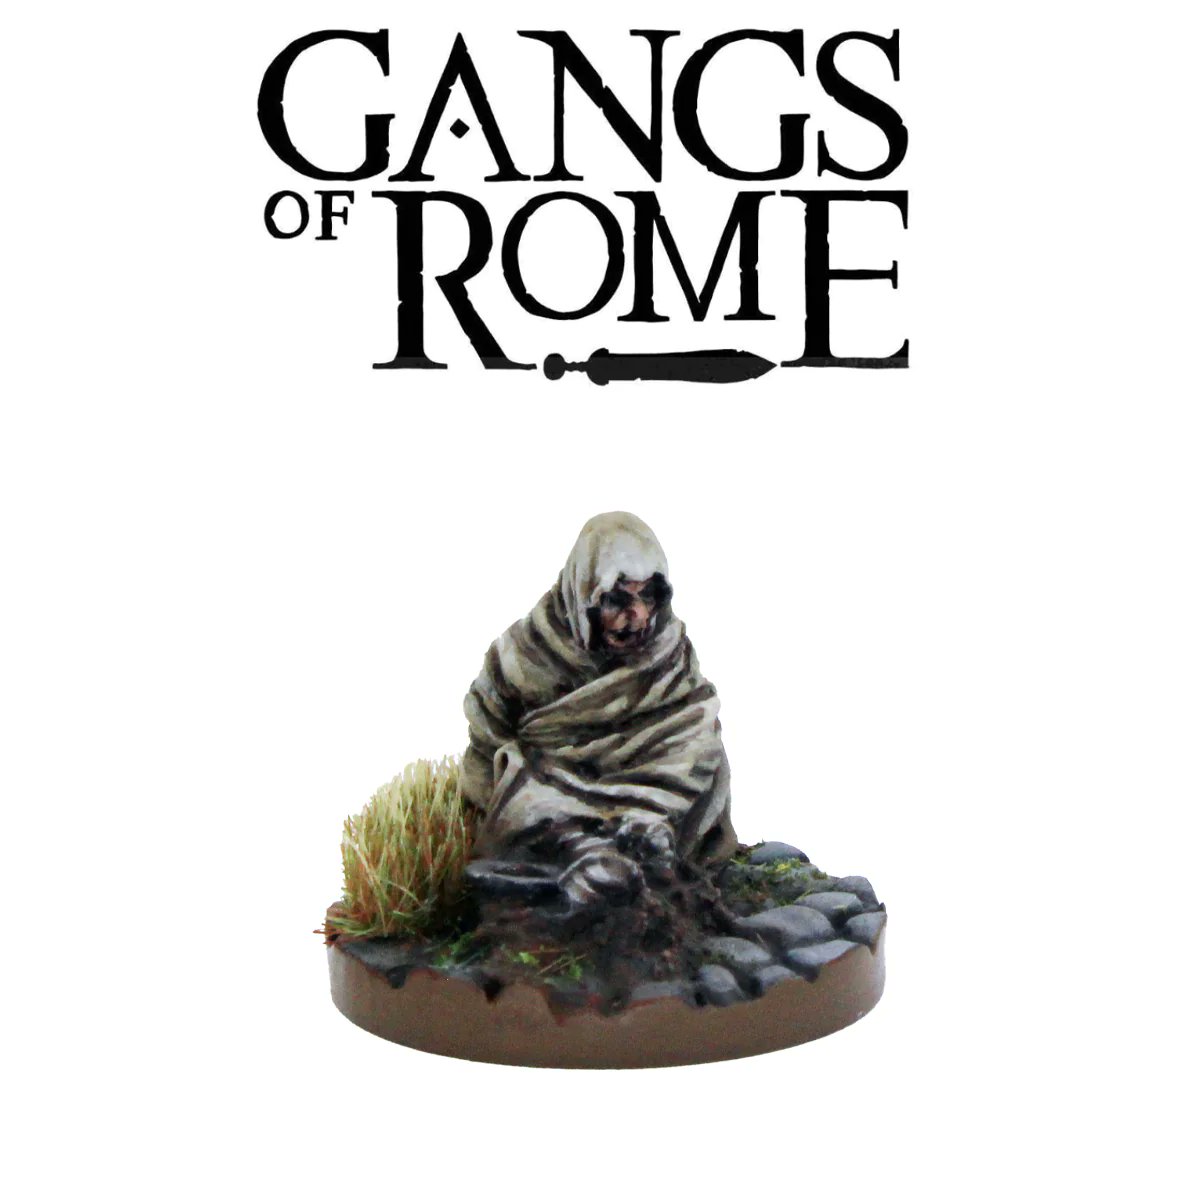 •Leper•
A leper is often shunned, perfect cover
tinyurl.com/2xecdpyu
#Gor #GangsofRome #footsore #footsoreminiatures #SPG #wargaming #warmongers #gaming #minwargaming #tabletopgames #miniatures #figures